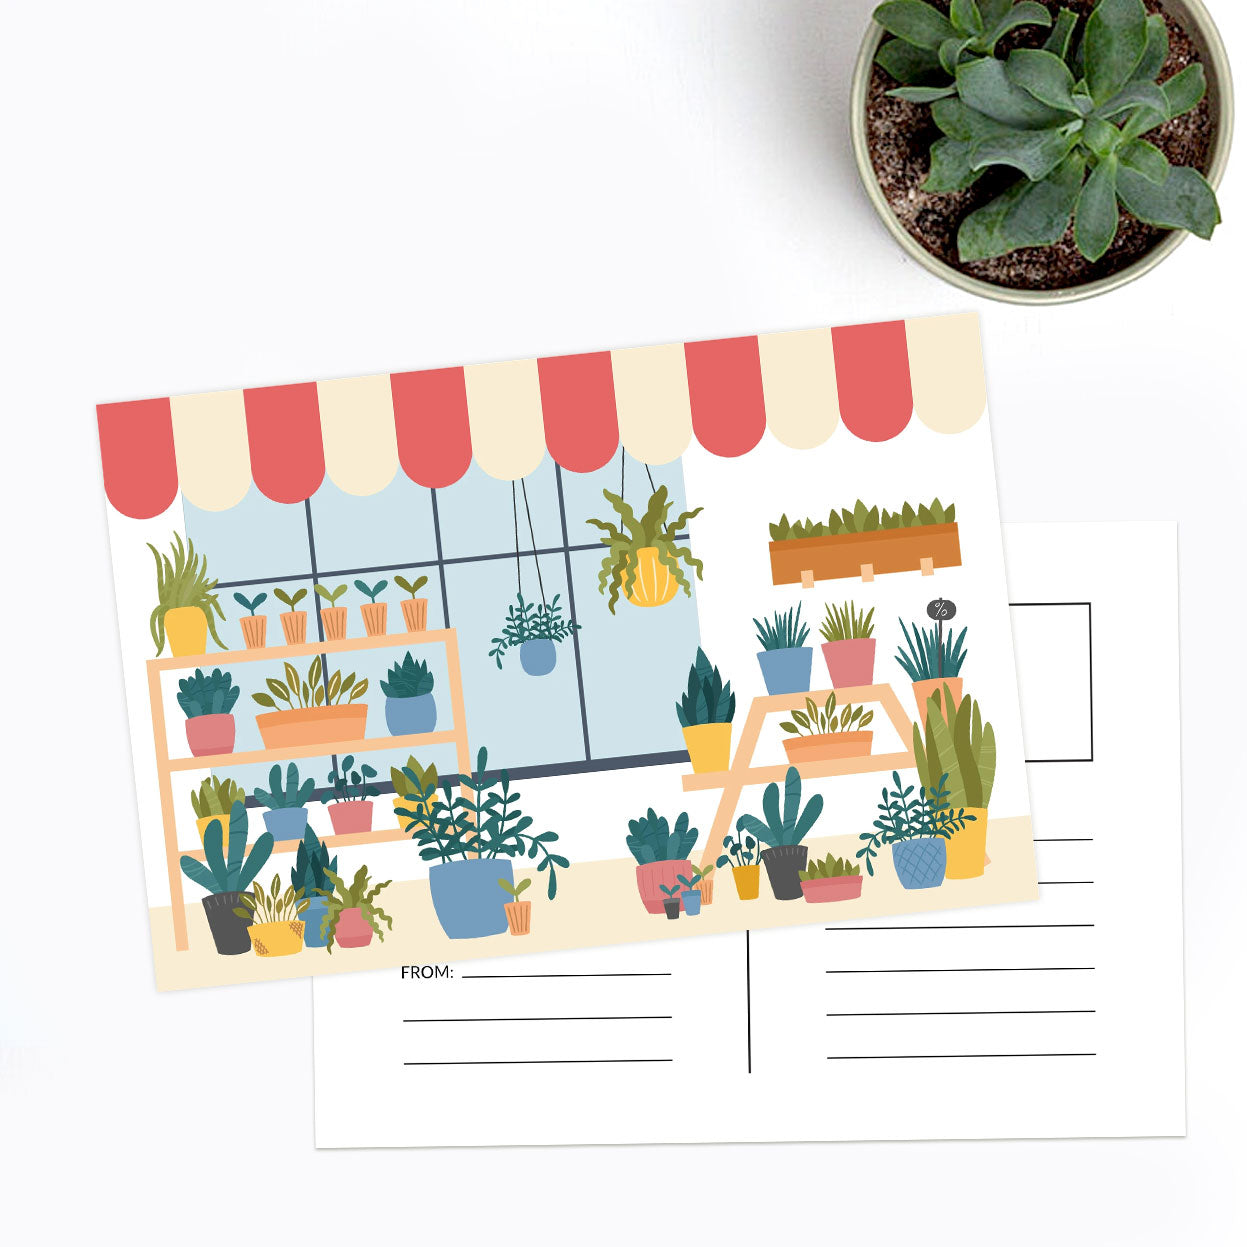 Succulents Greeting Card for sale, Thank you succulents card, Succulents Gift Ideas, Cactus Greeting Card, House plants card, Valentine succulents card, Succulents greeting card for her